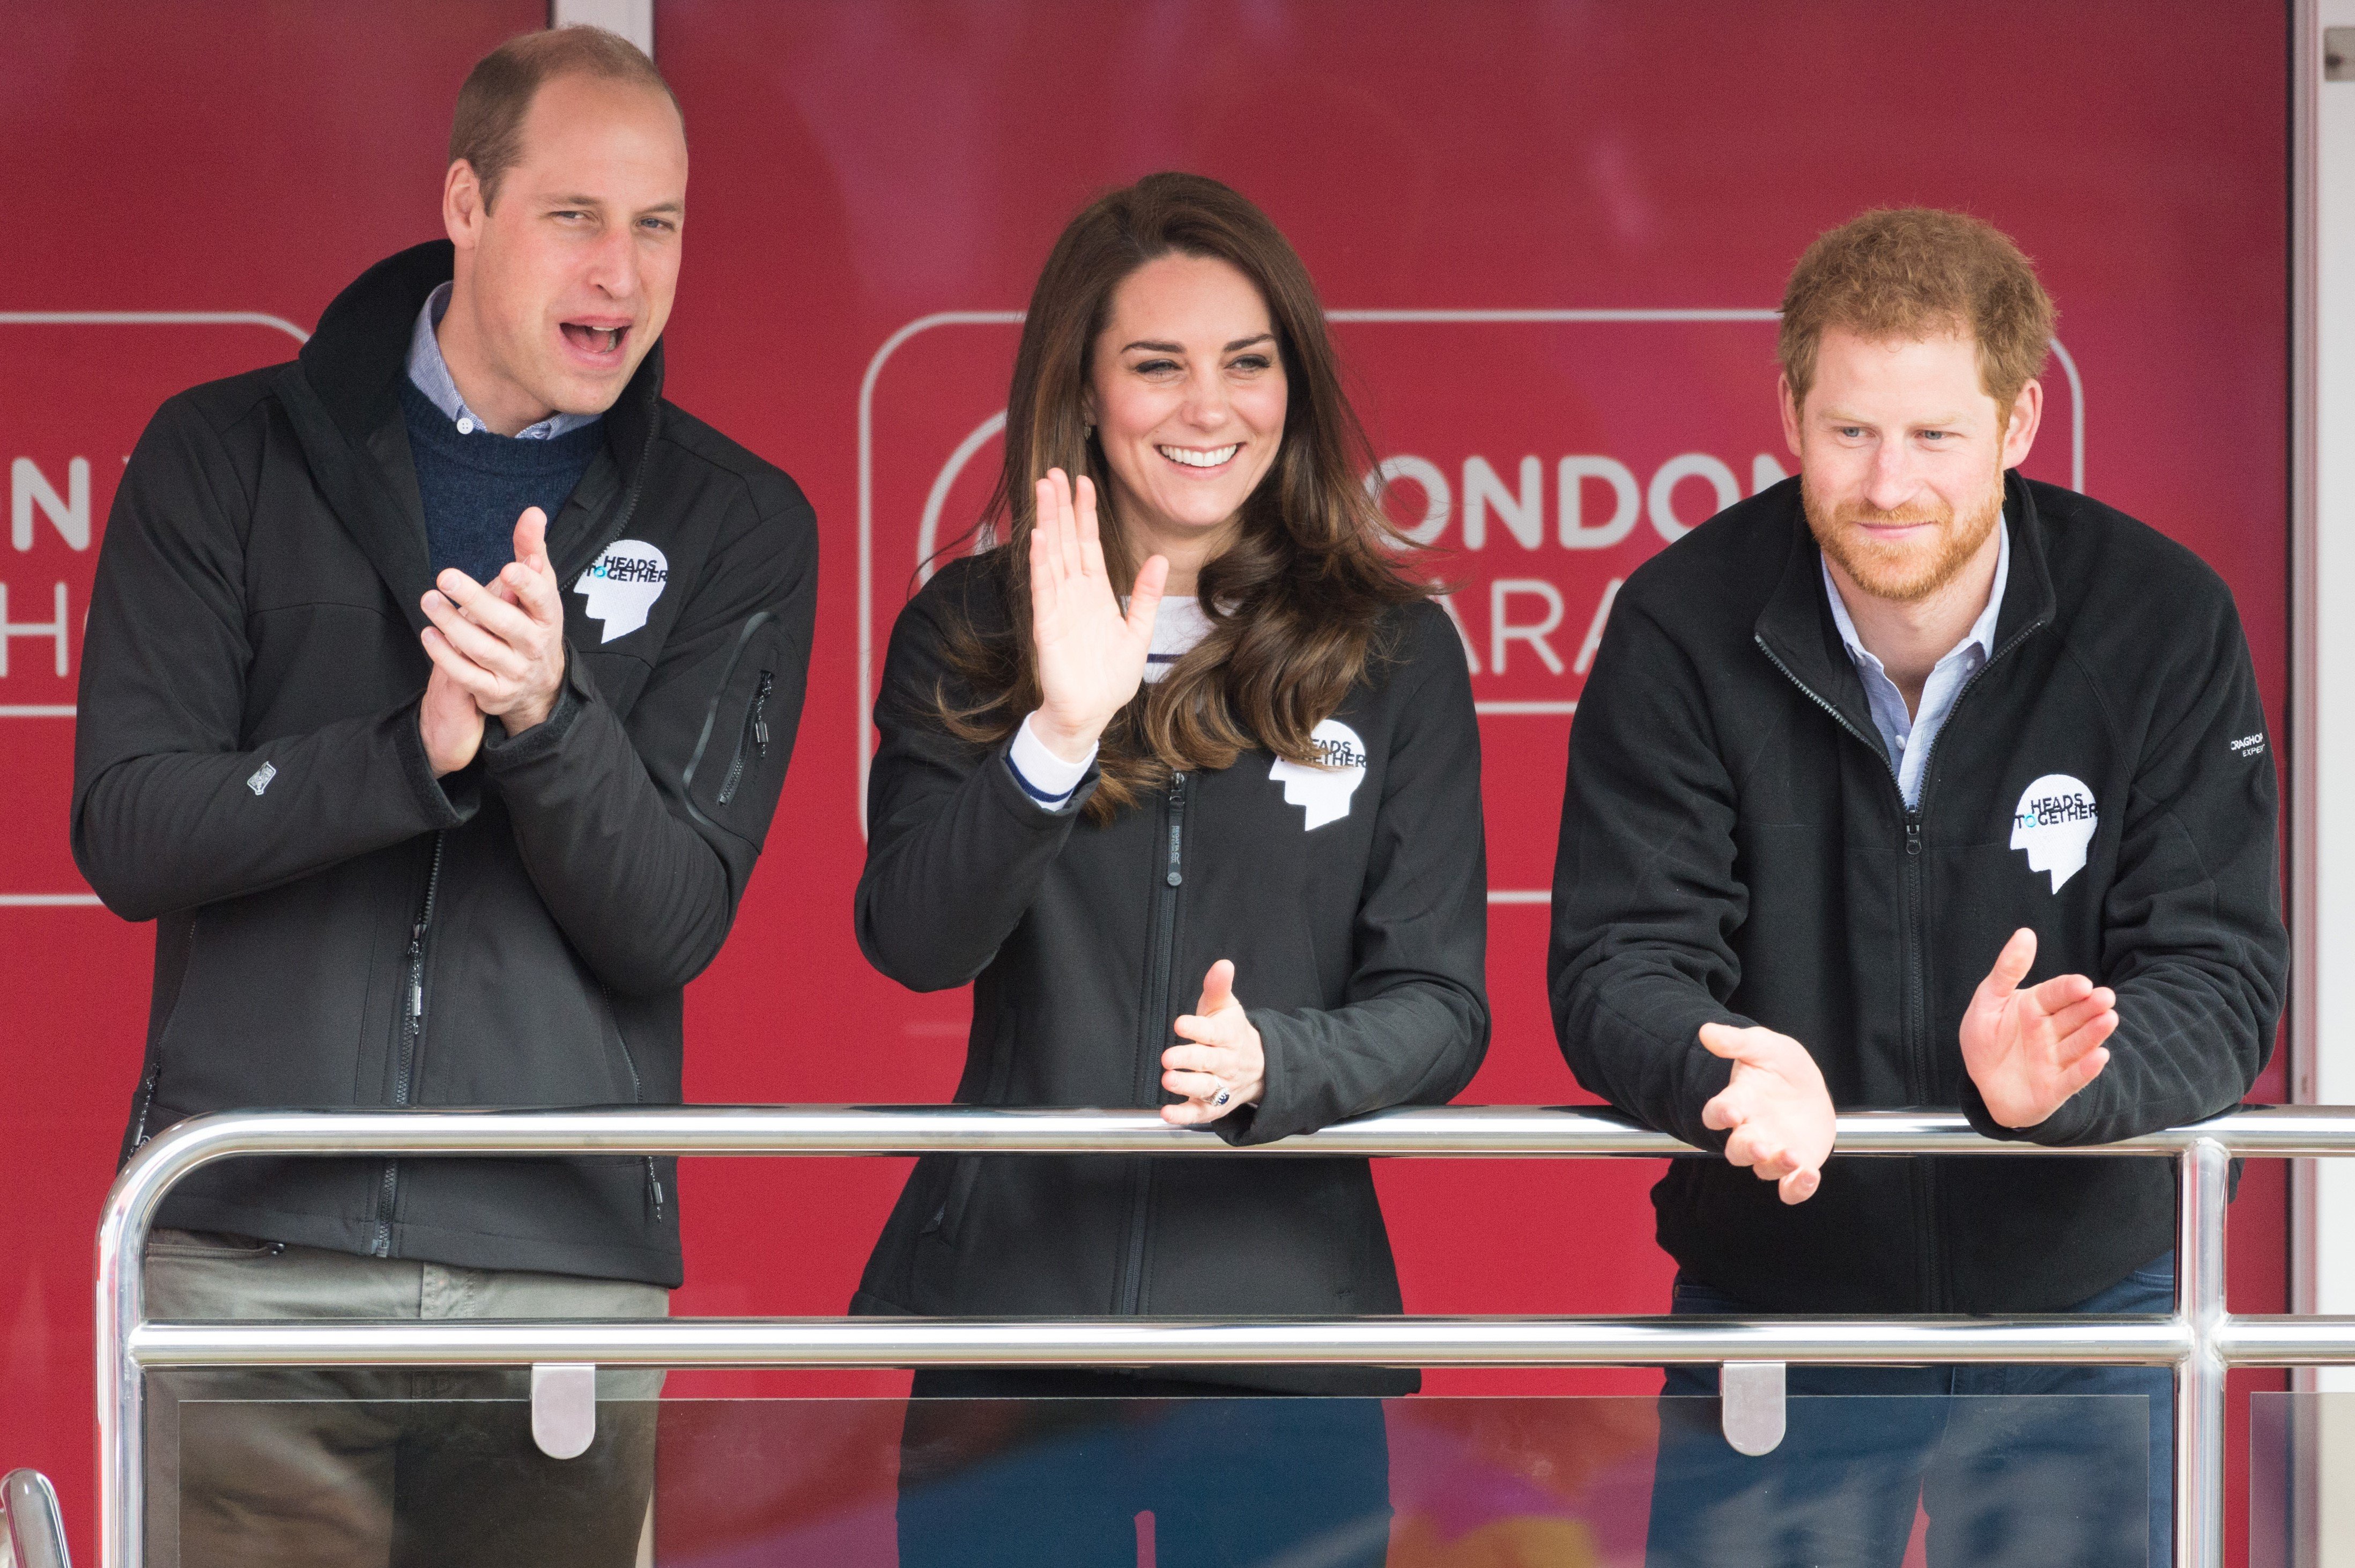 Prince William, Duke of Cambridge, Catherine, the Duchess of Cambridge and Prince Harry watch the Elite men's race of the Virgin Money London Marathon in London, England on April 23, 2017. | Source: Getty Images